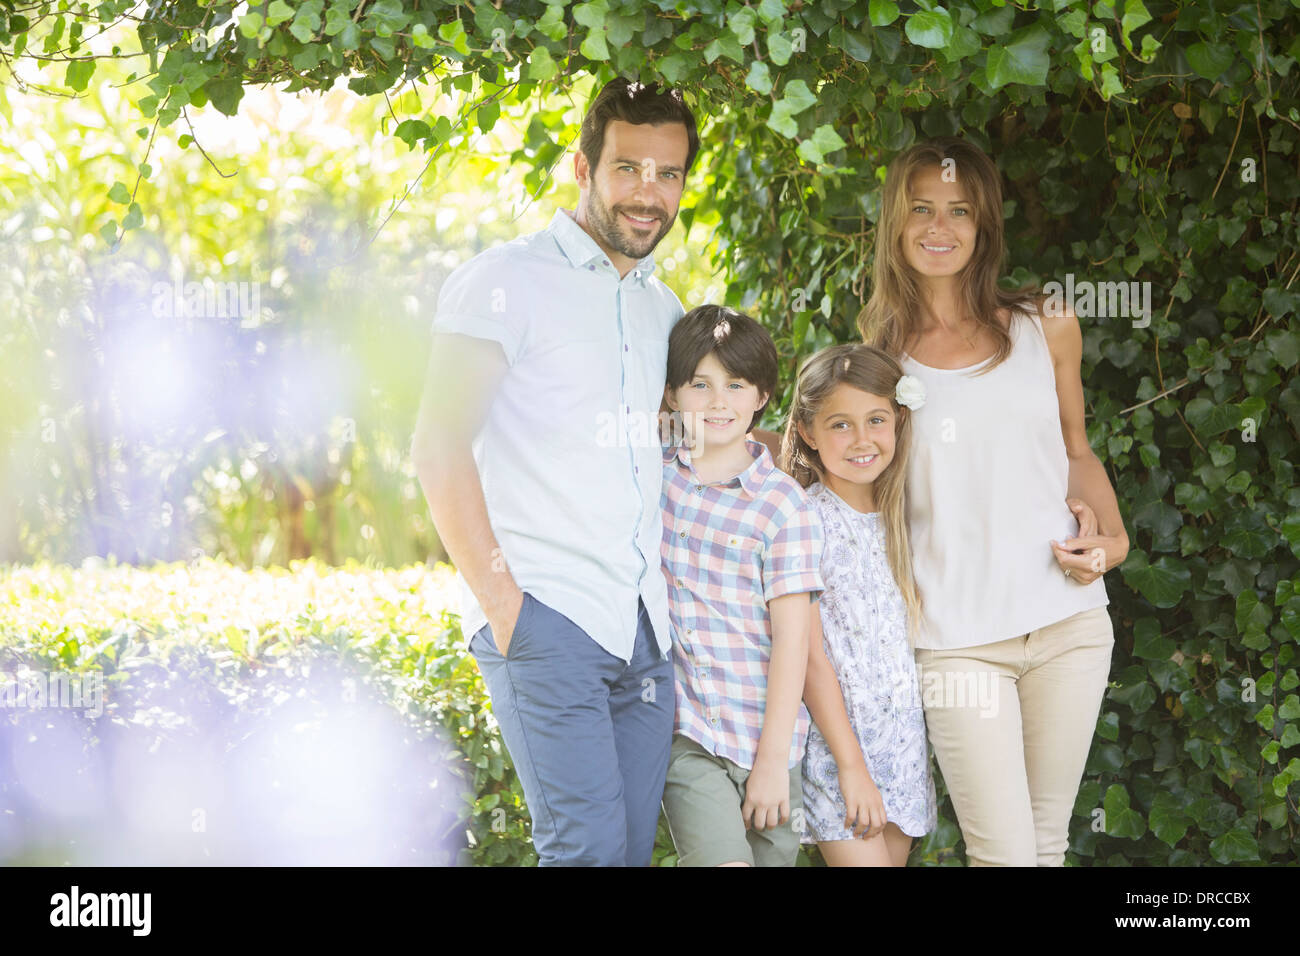 Family smiling under ivy Stock Photo